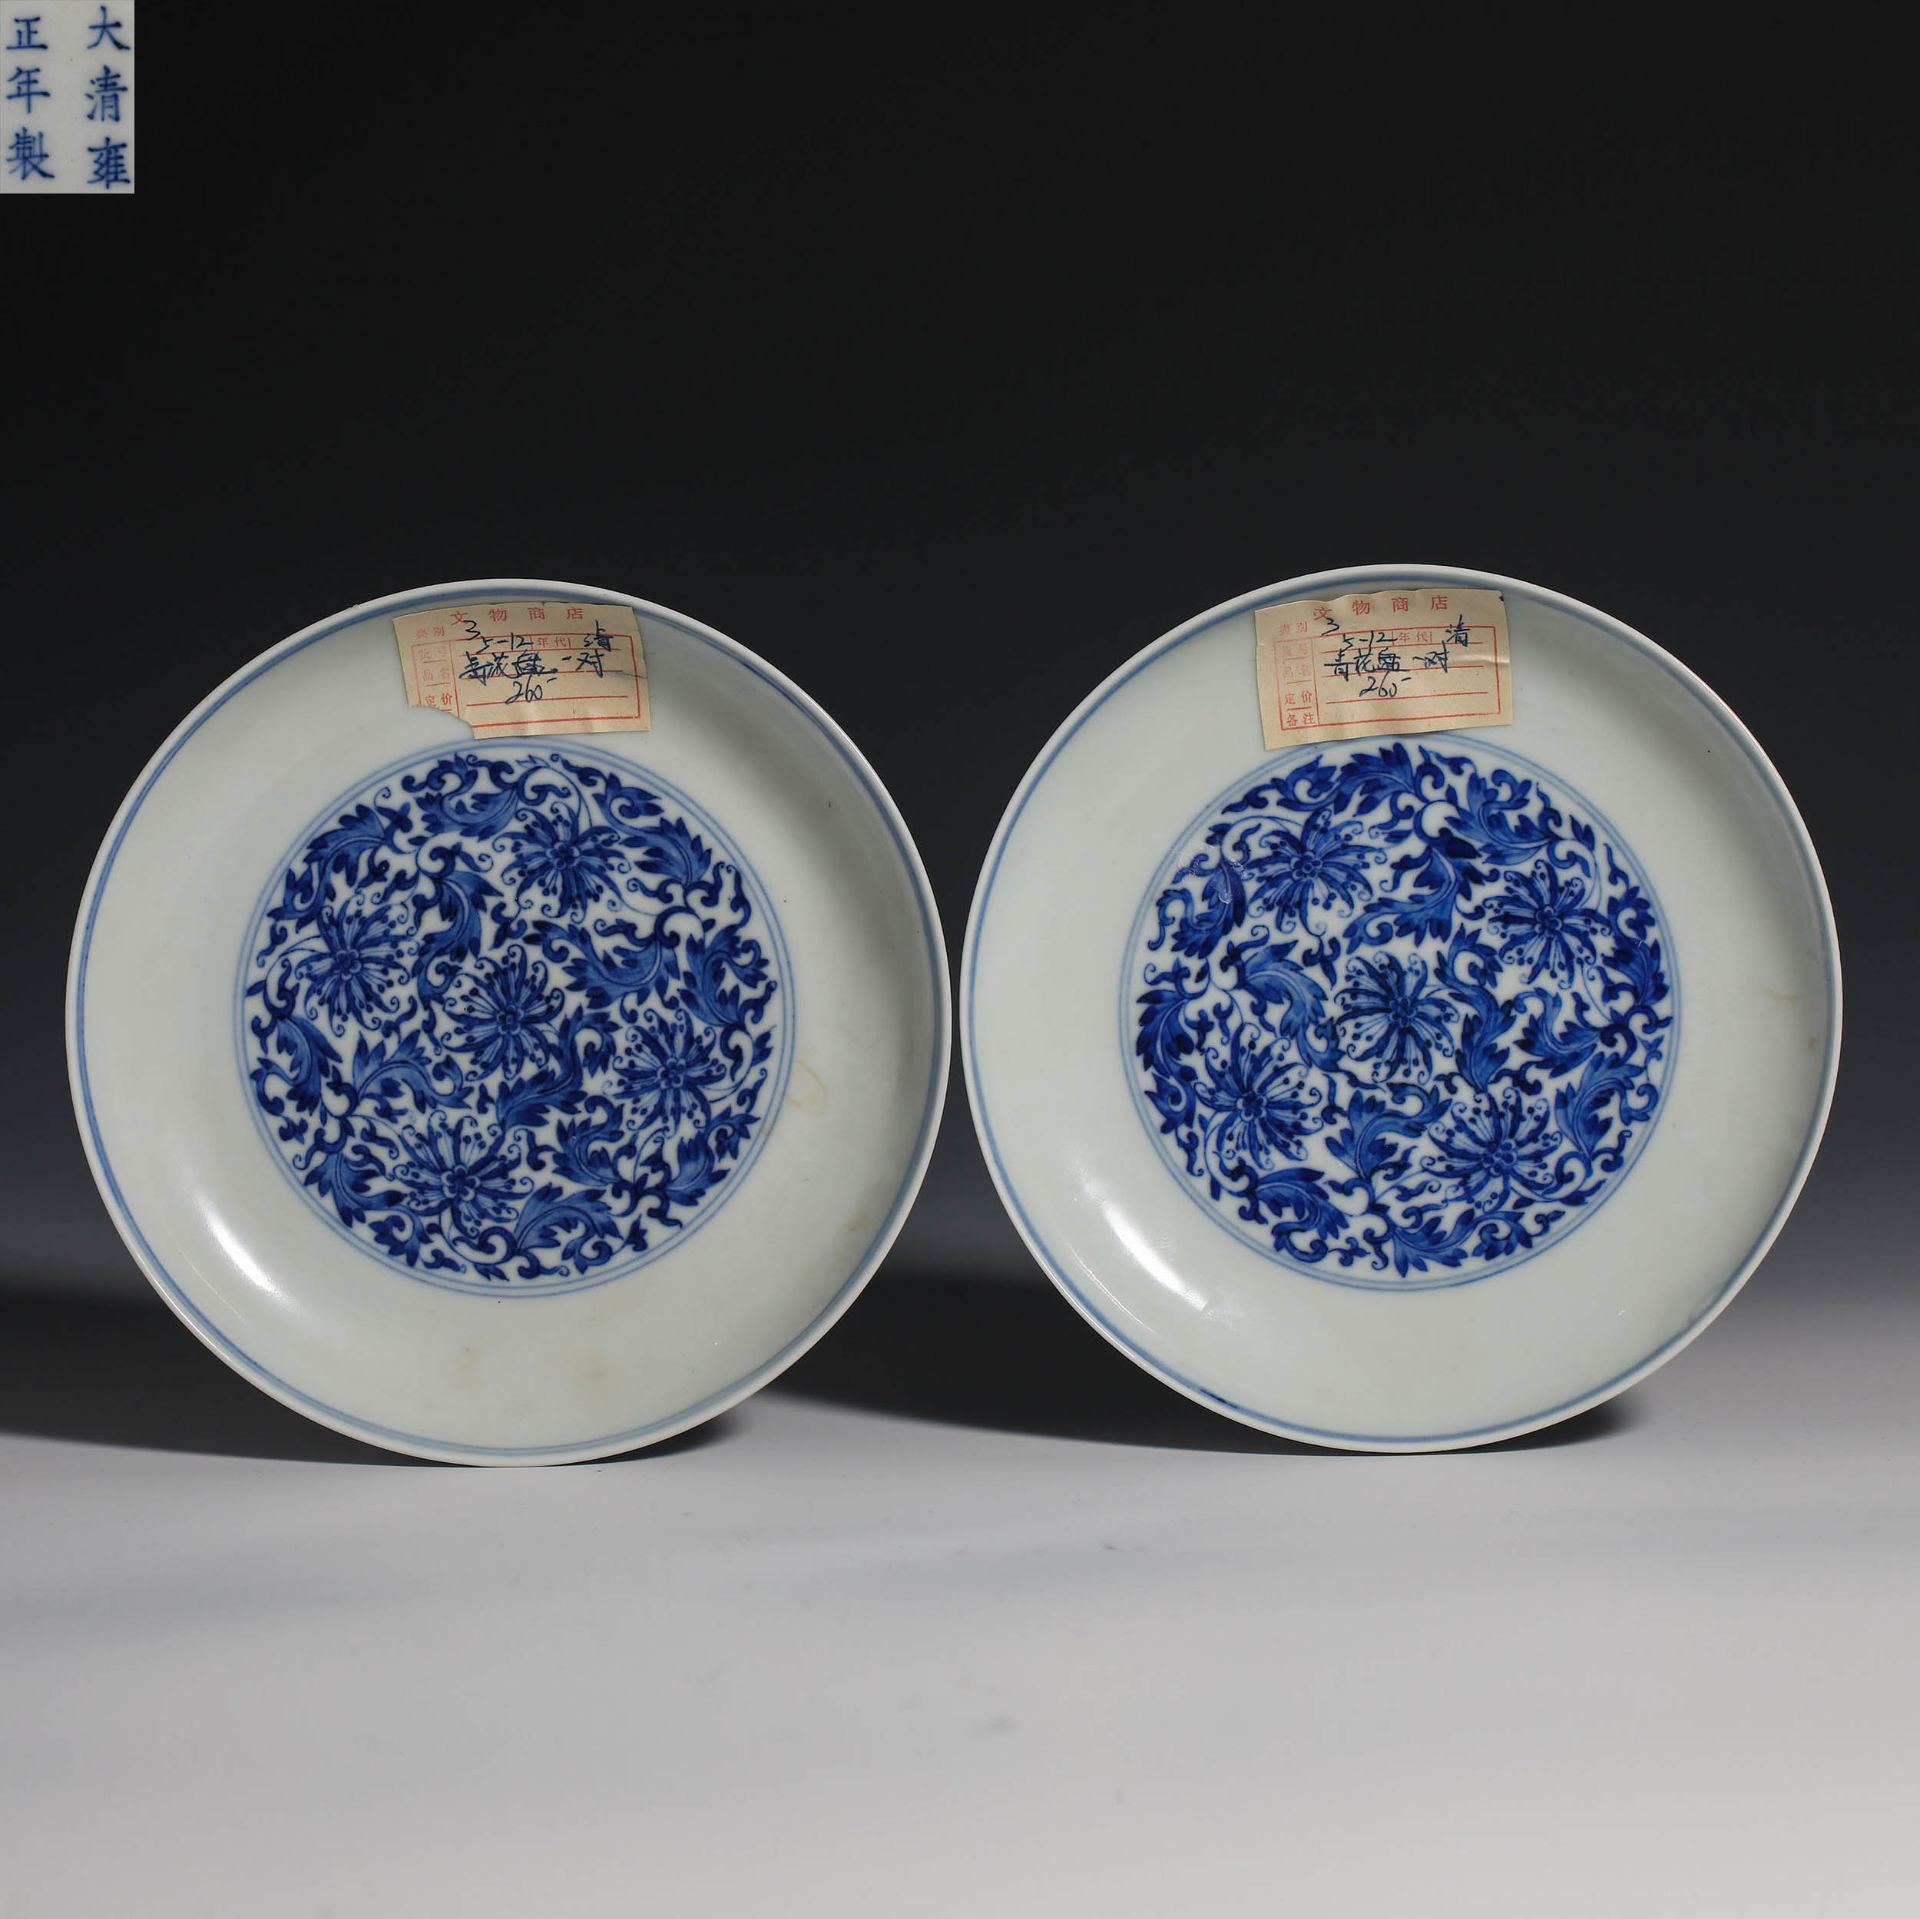 A Pair of Blue and White Floral Plates, 18th Century